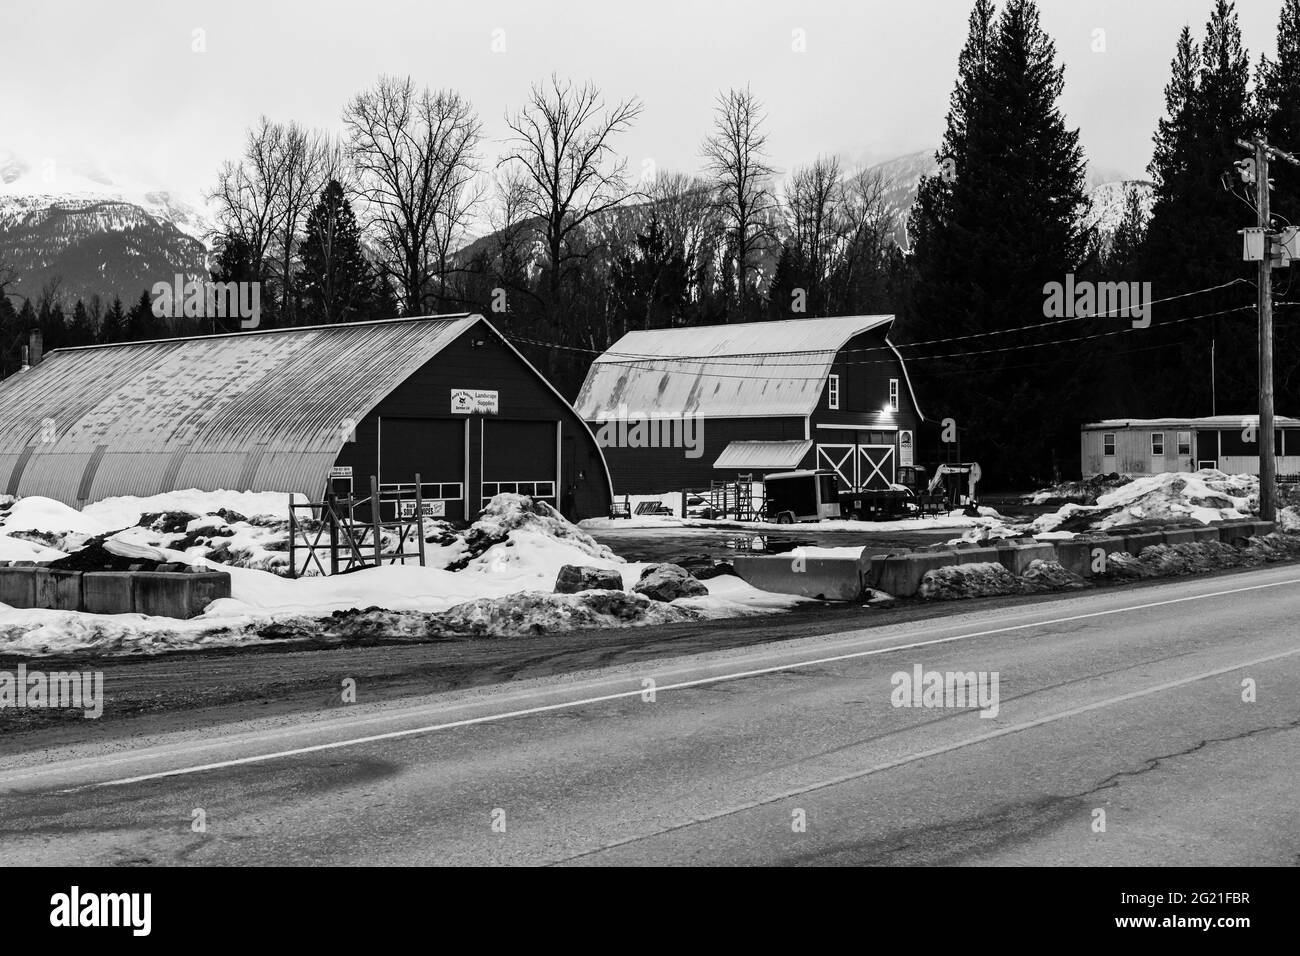 REVELSTOKE, CANADA - MARCH 14, 2021: black and white large industrial and commercial warehouse property in small town Stock Photo